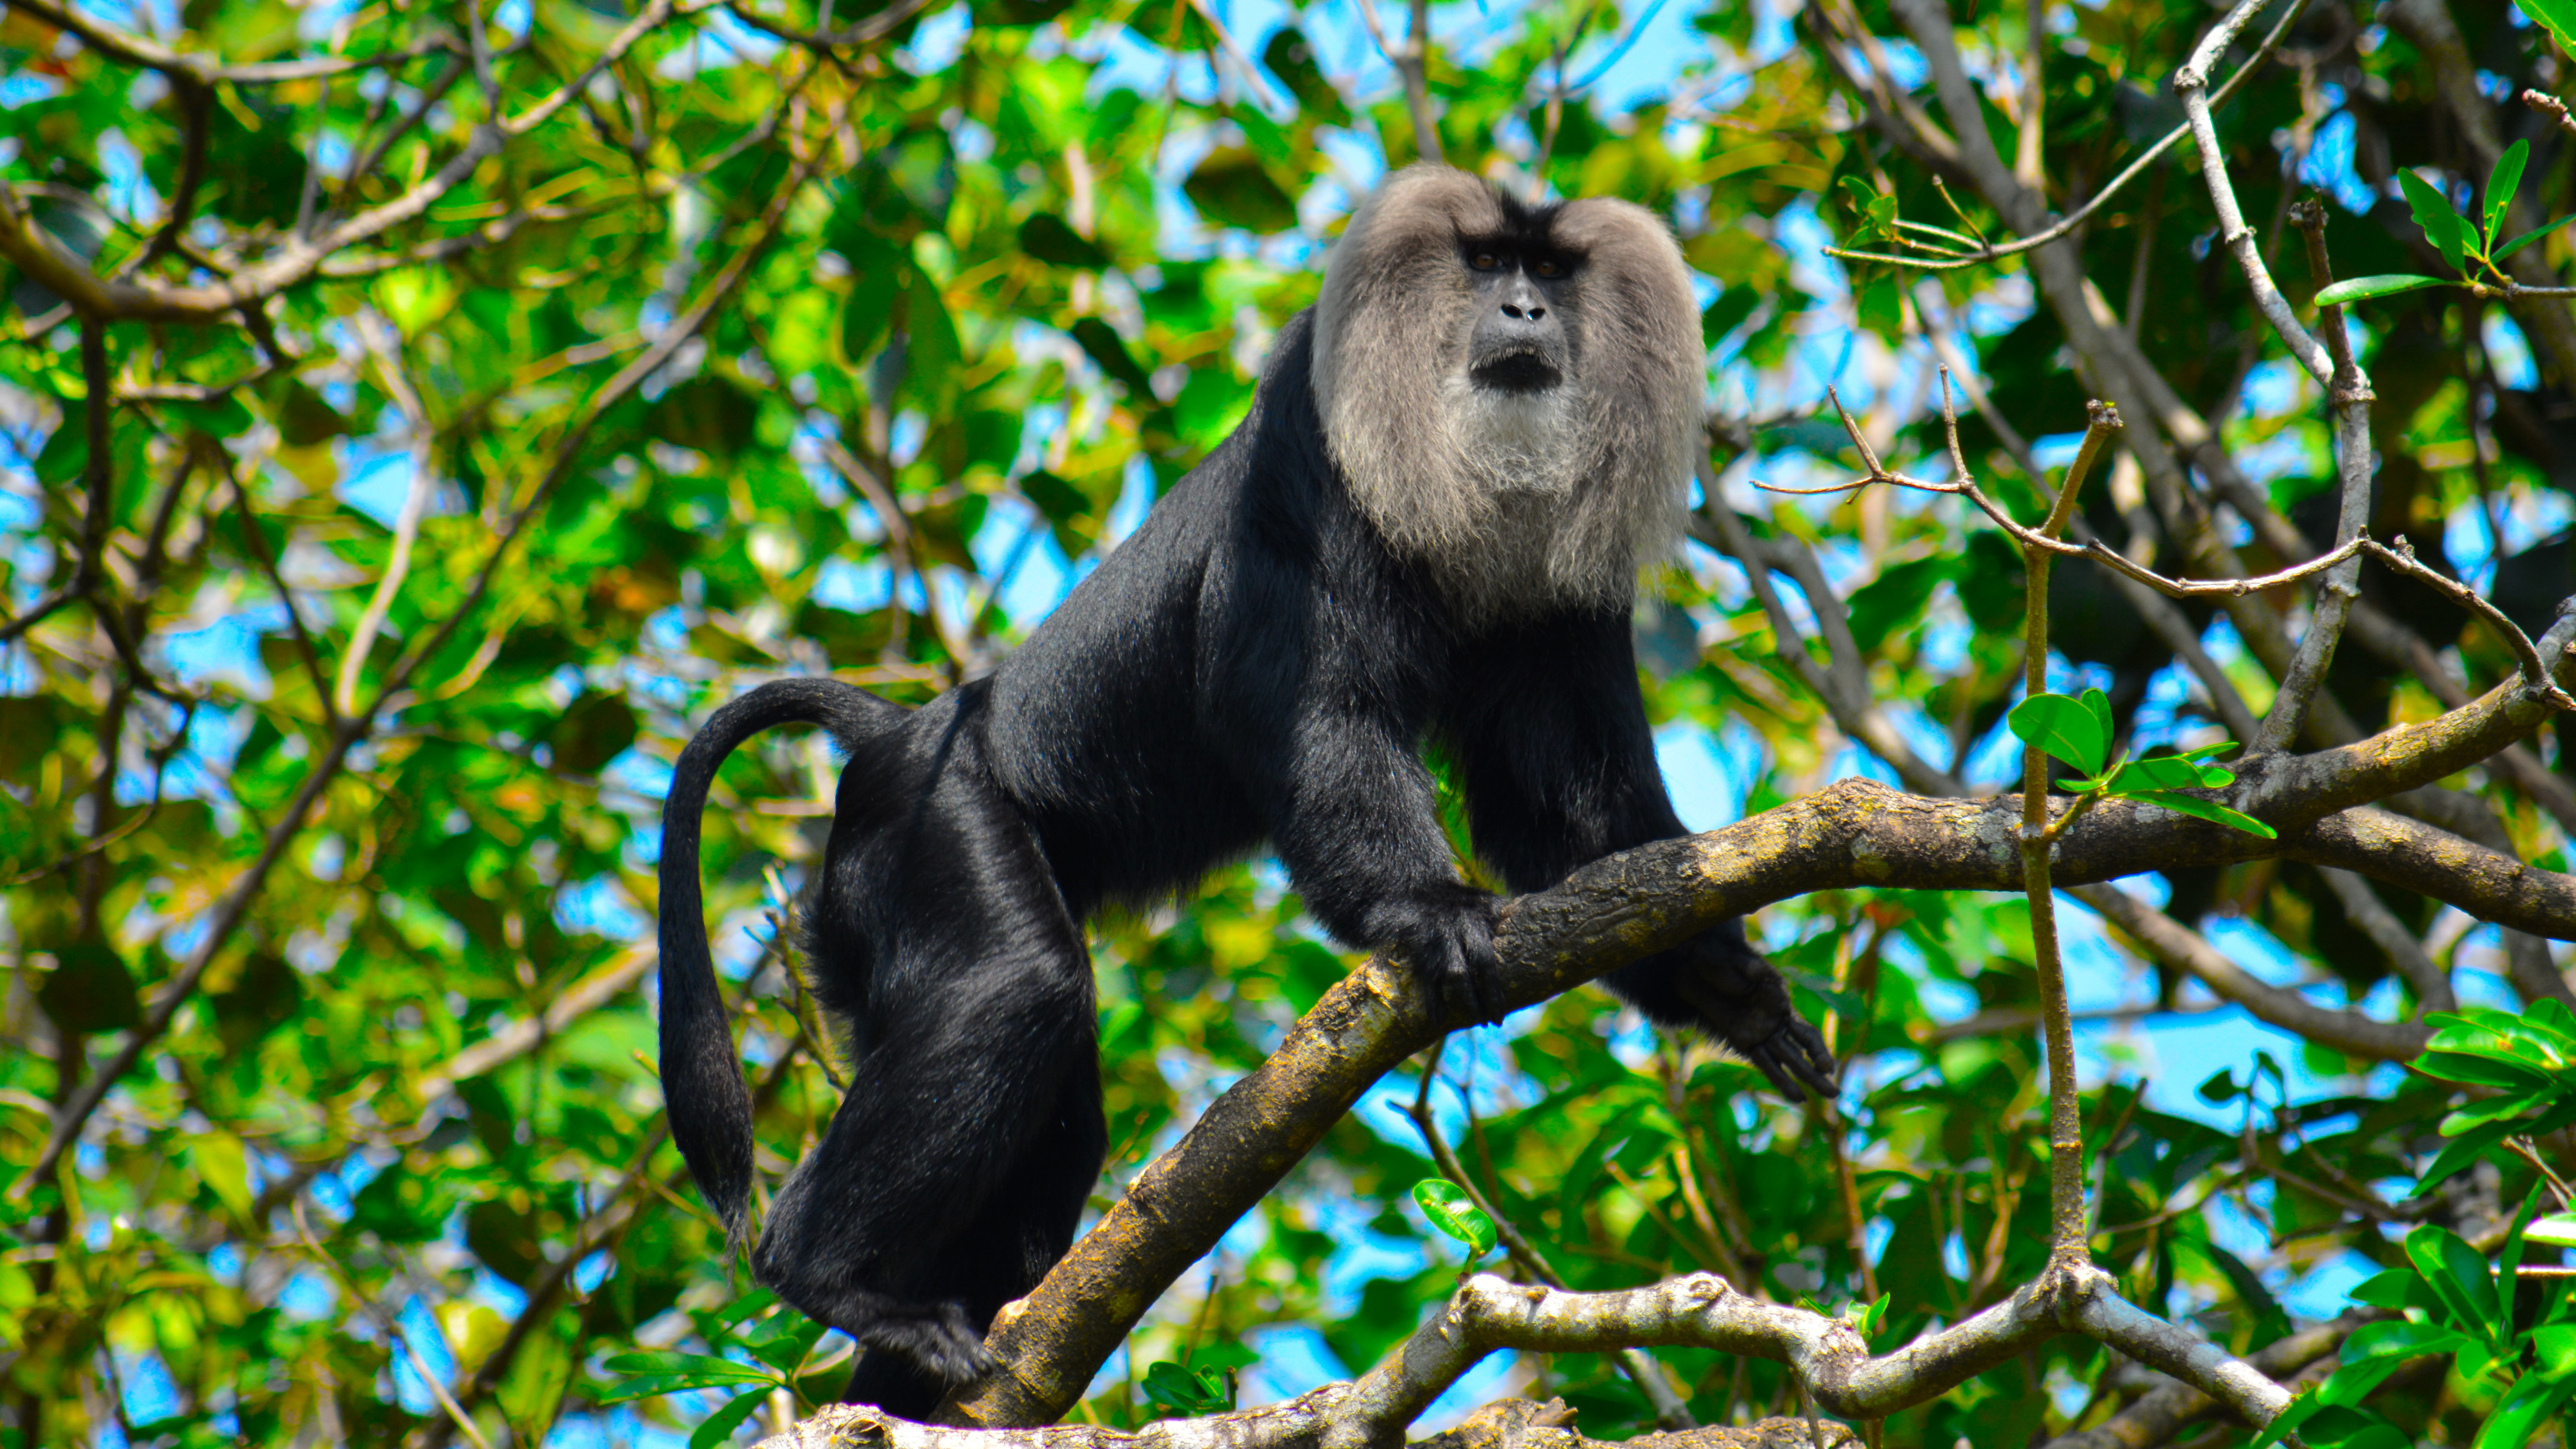 File:THE LION-TAILED MACAQUE.jpg - Wikimedia Commons